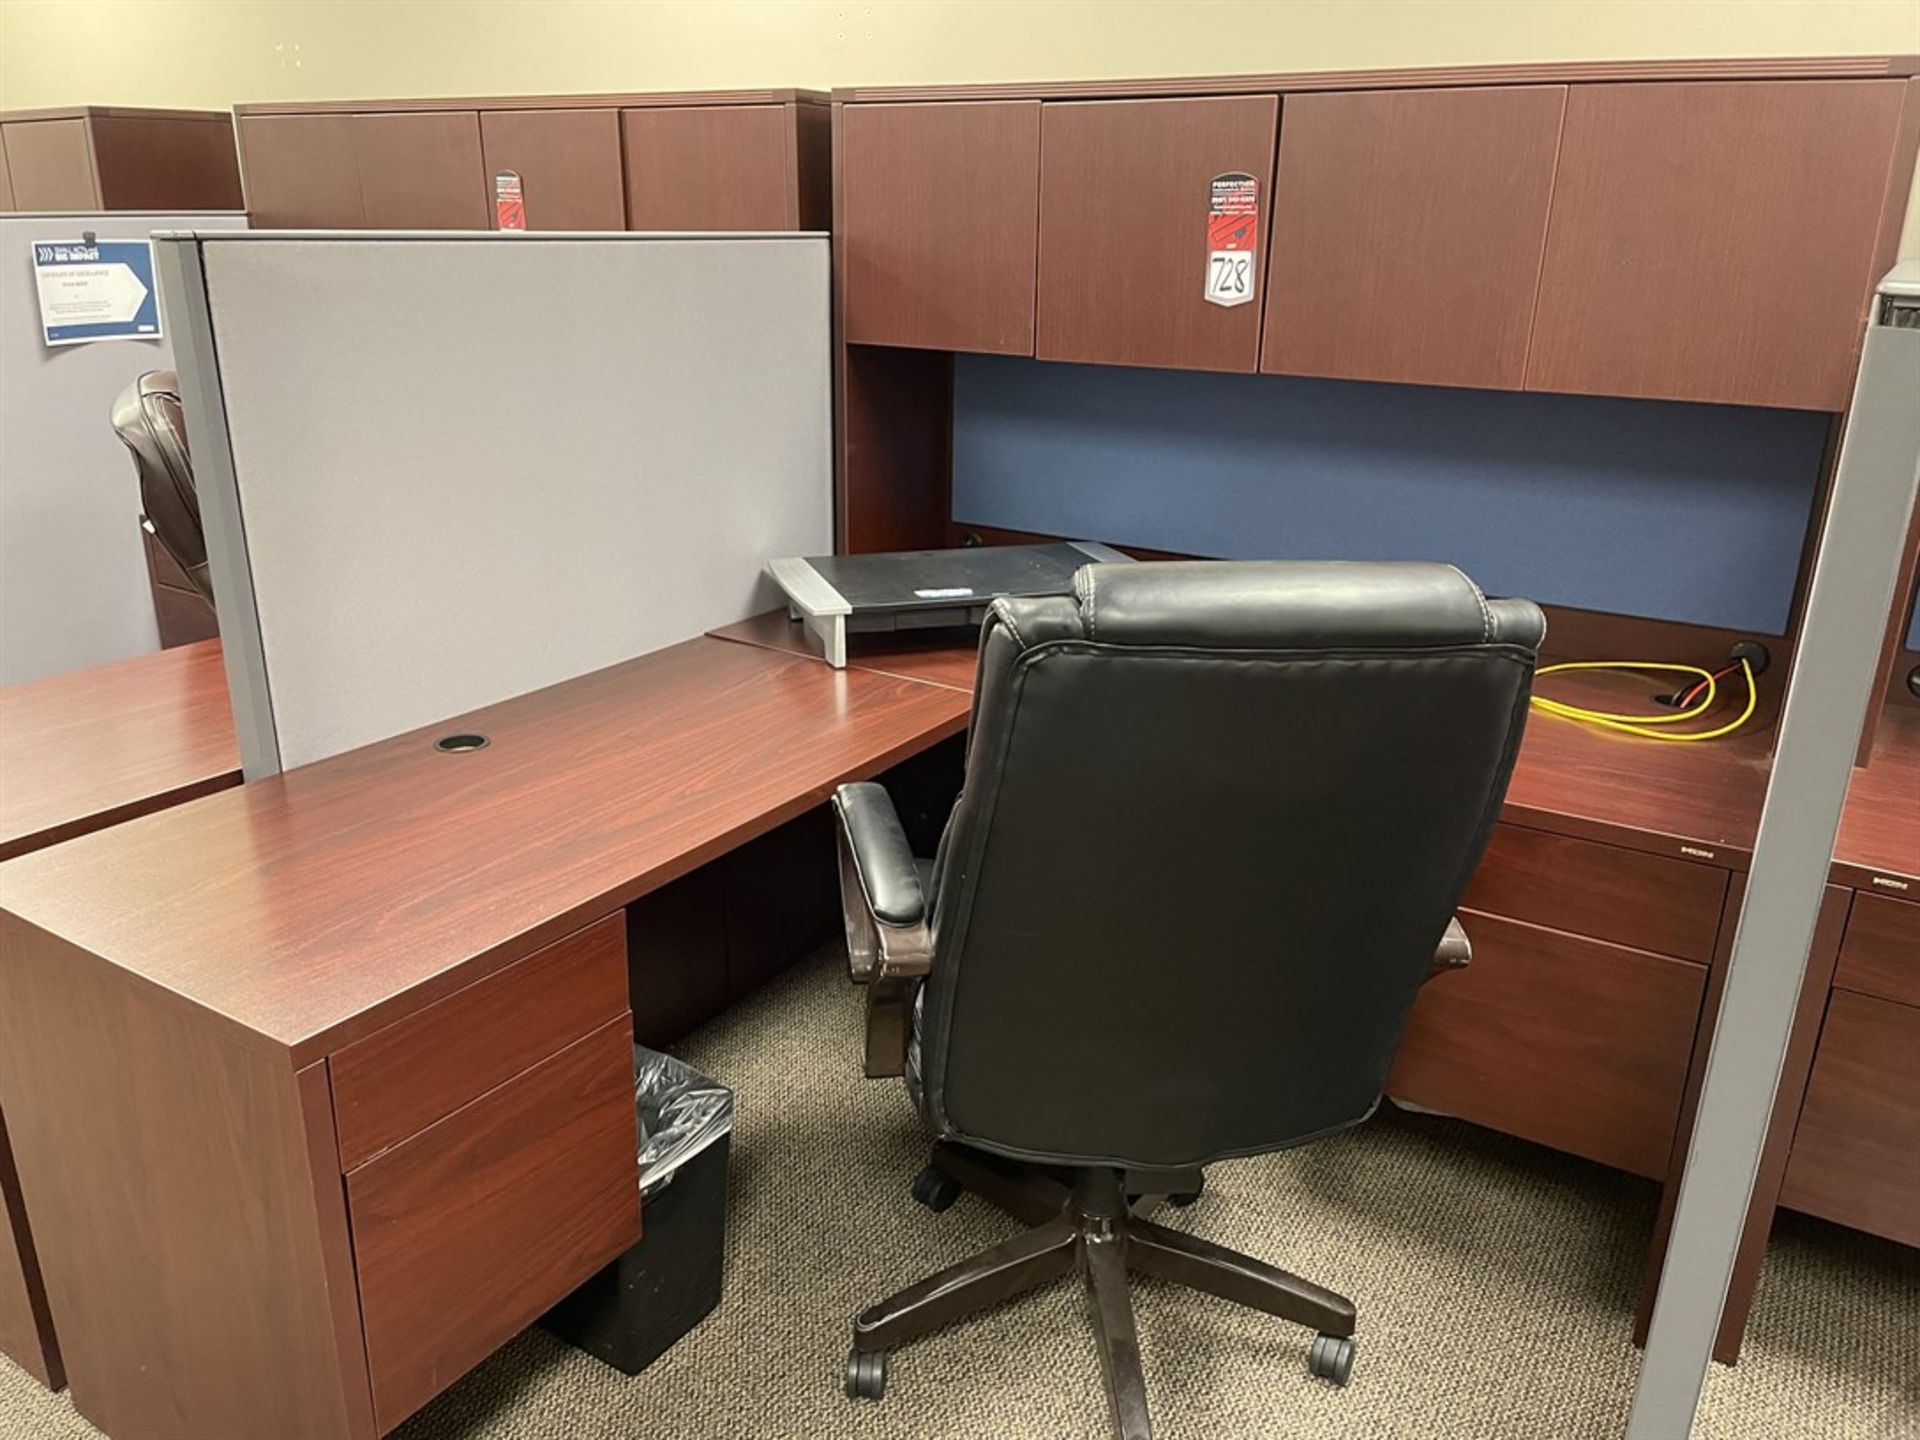 L-Shaped Desk and Office Chair, (No Contents or Electronics)